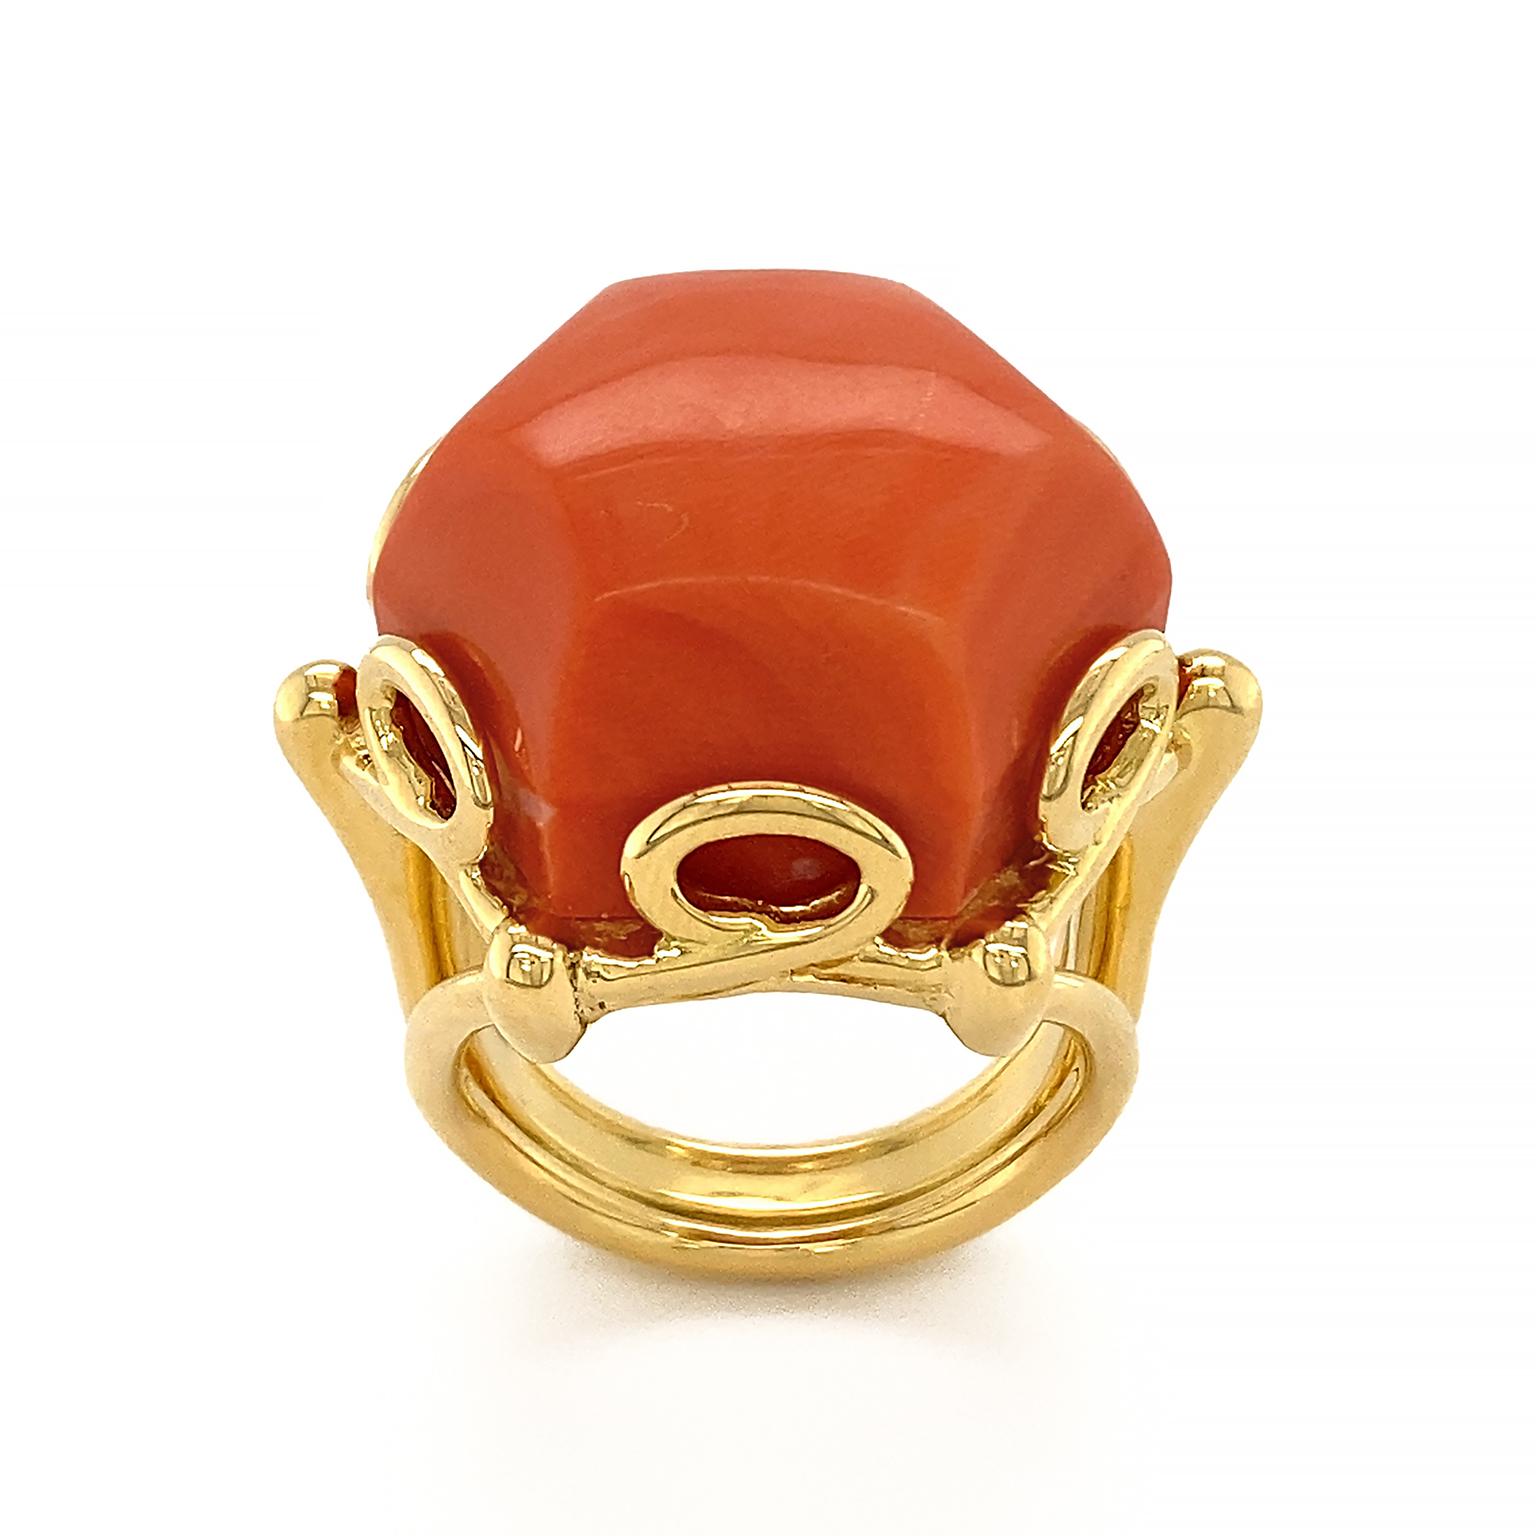 Geometrical Hexagon Dark Coral Solitaire Ring gleams with color. The deep orange-red jewel is carved into a hexagonal shape with tall sides. It rests on an 18k yellow gold band with a split shank. The setting of choice are gold loops which double as